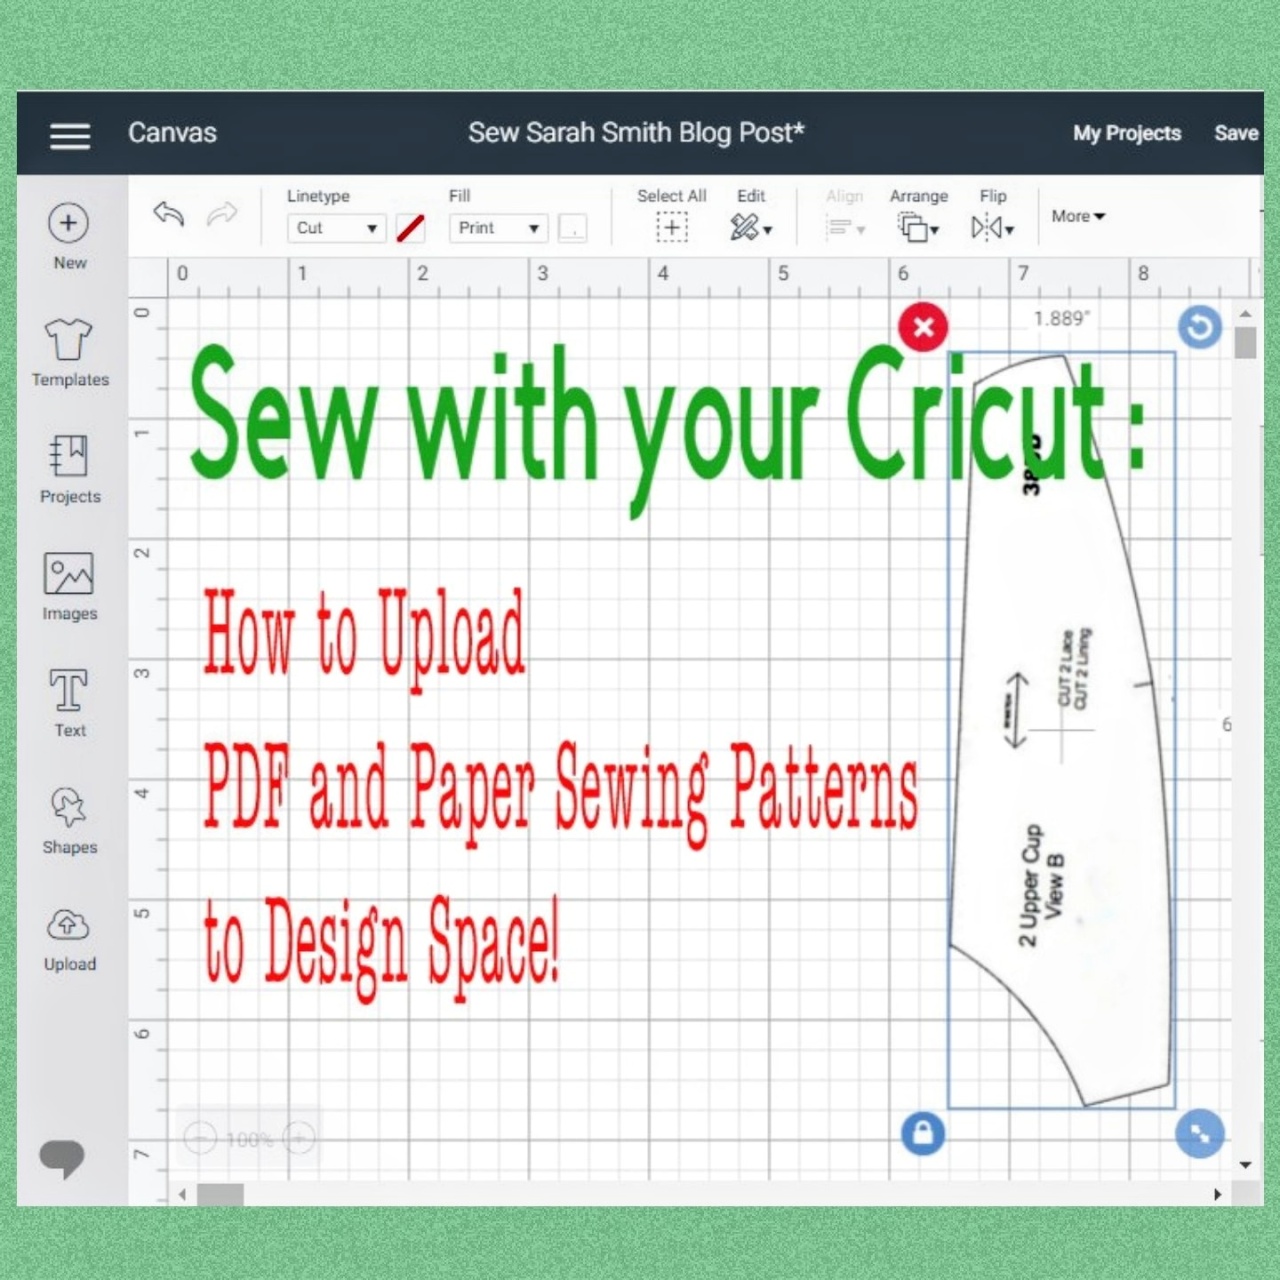 Sew with your Cricut : How to Convert and Upload PDF and Paper